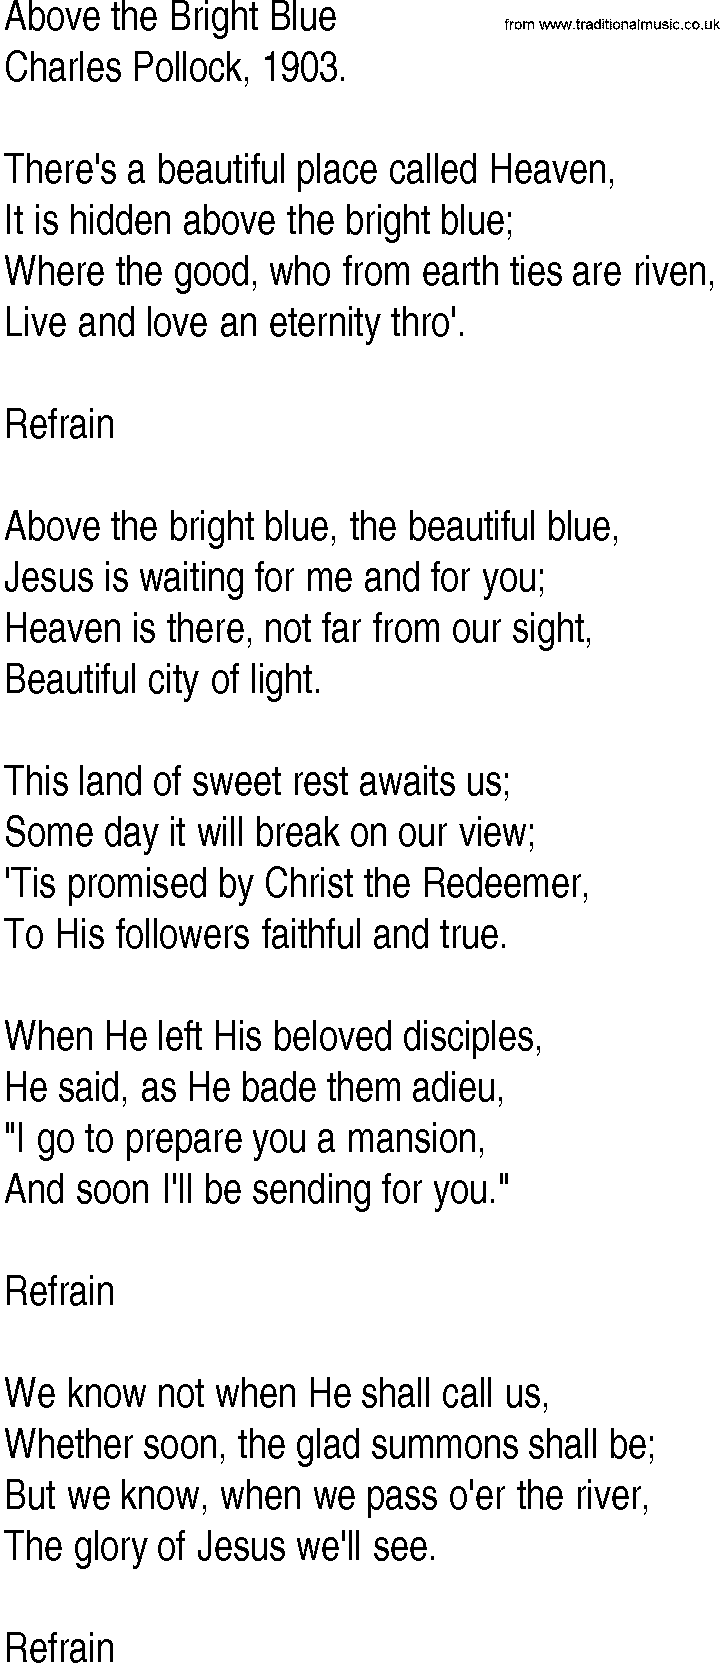 Hymn and Gospel Song: Above the Bright Blue by Charles Pollock lyrics